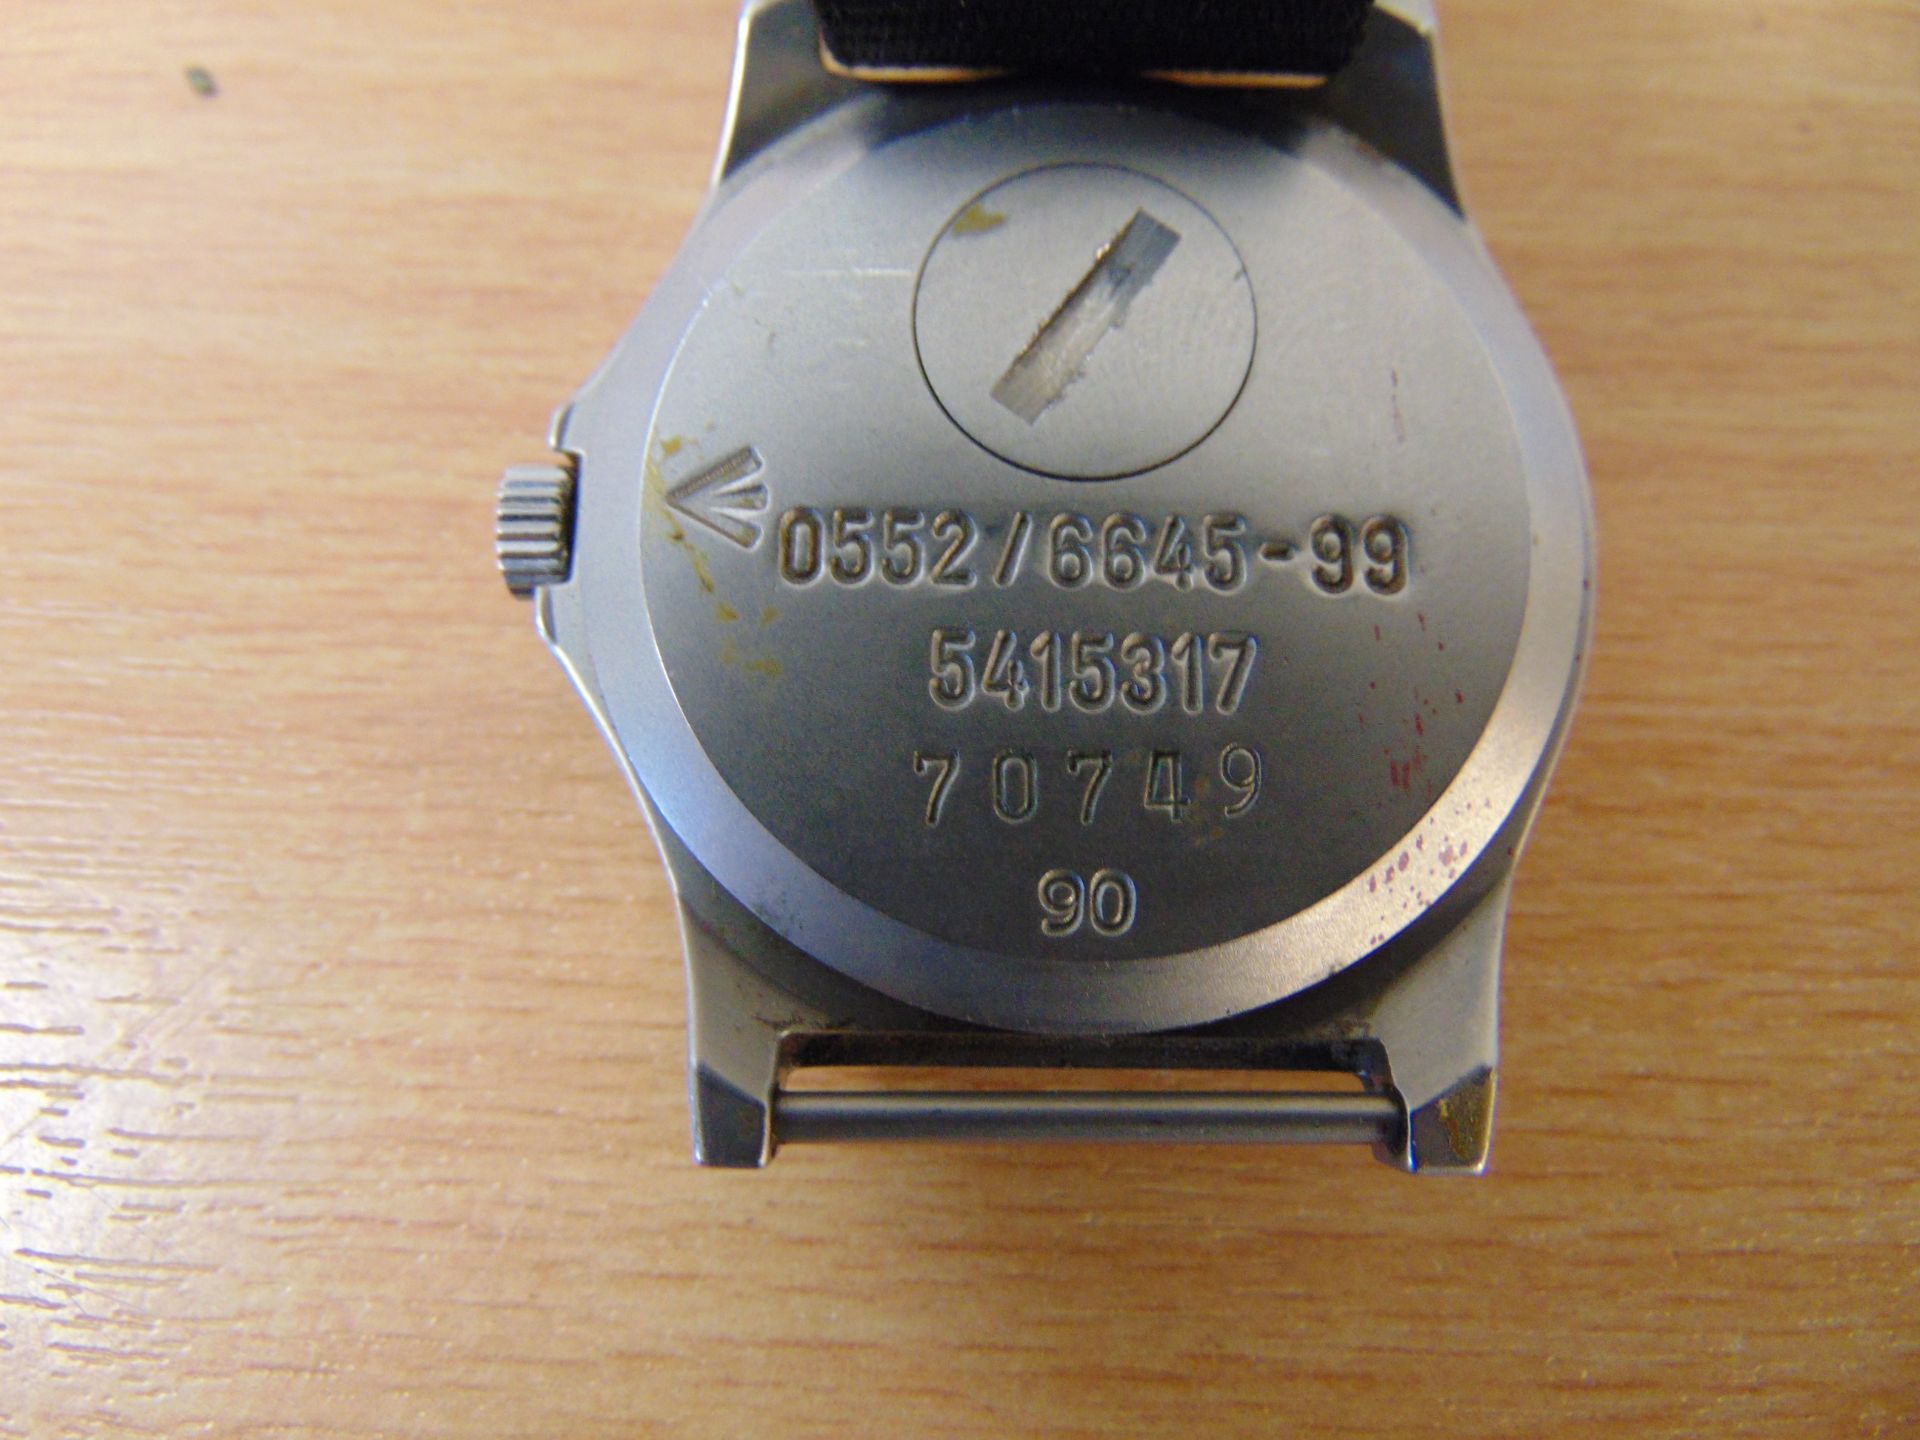 CWC W10 British Army Service Watch Nato Marks, Date 1998 - Image 3 of 4